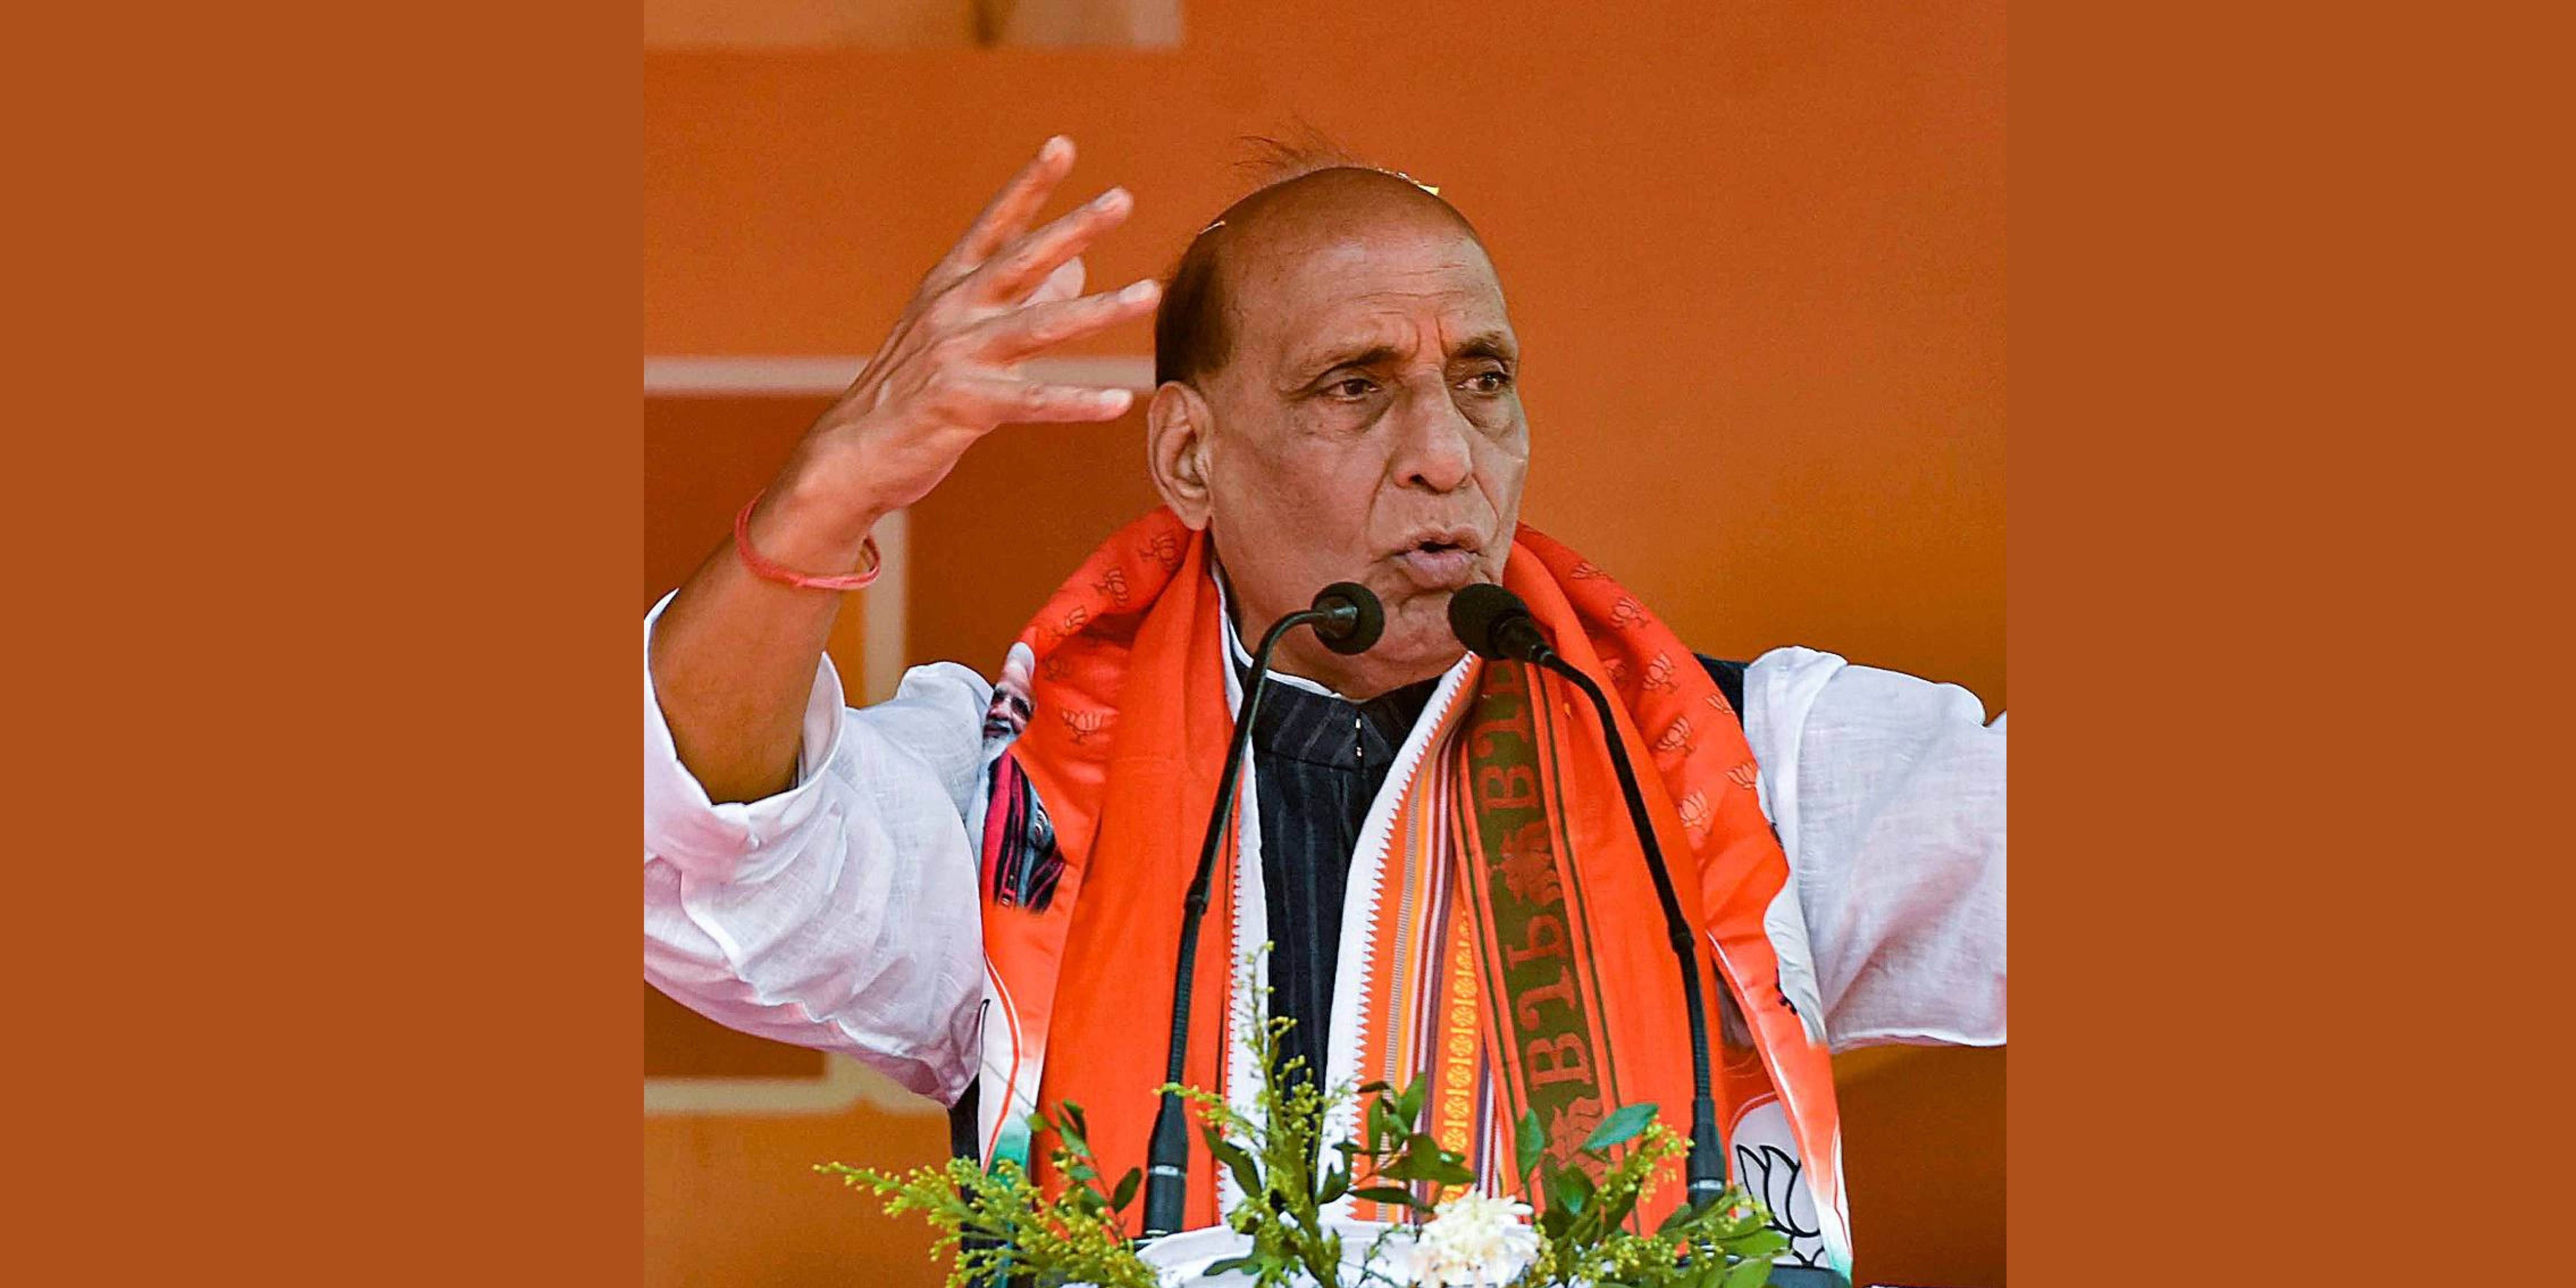 Rajnath Singh asserts PoK belongs to India: "Was, is, and will remain ours"